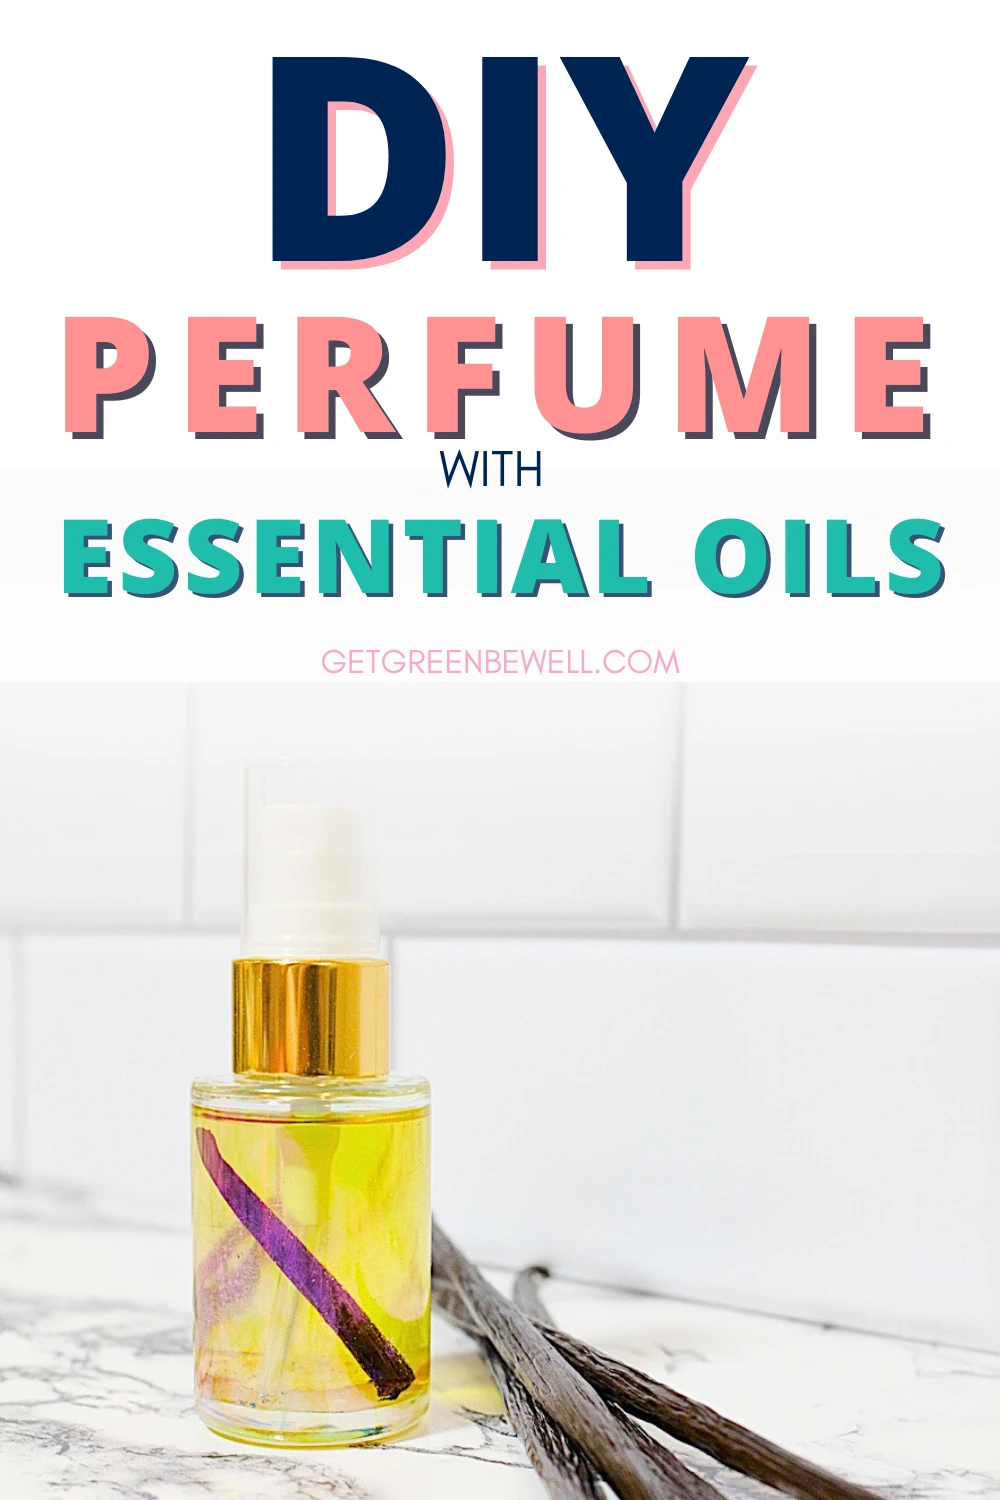 Diy perfume with essential oils.